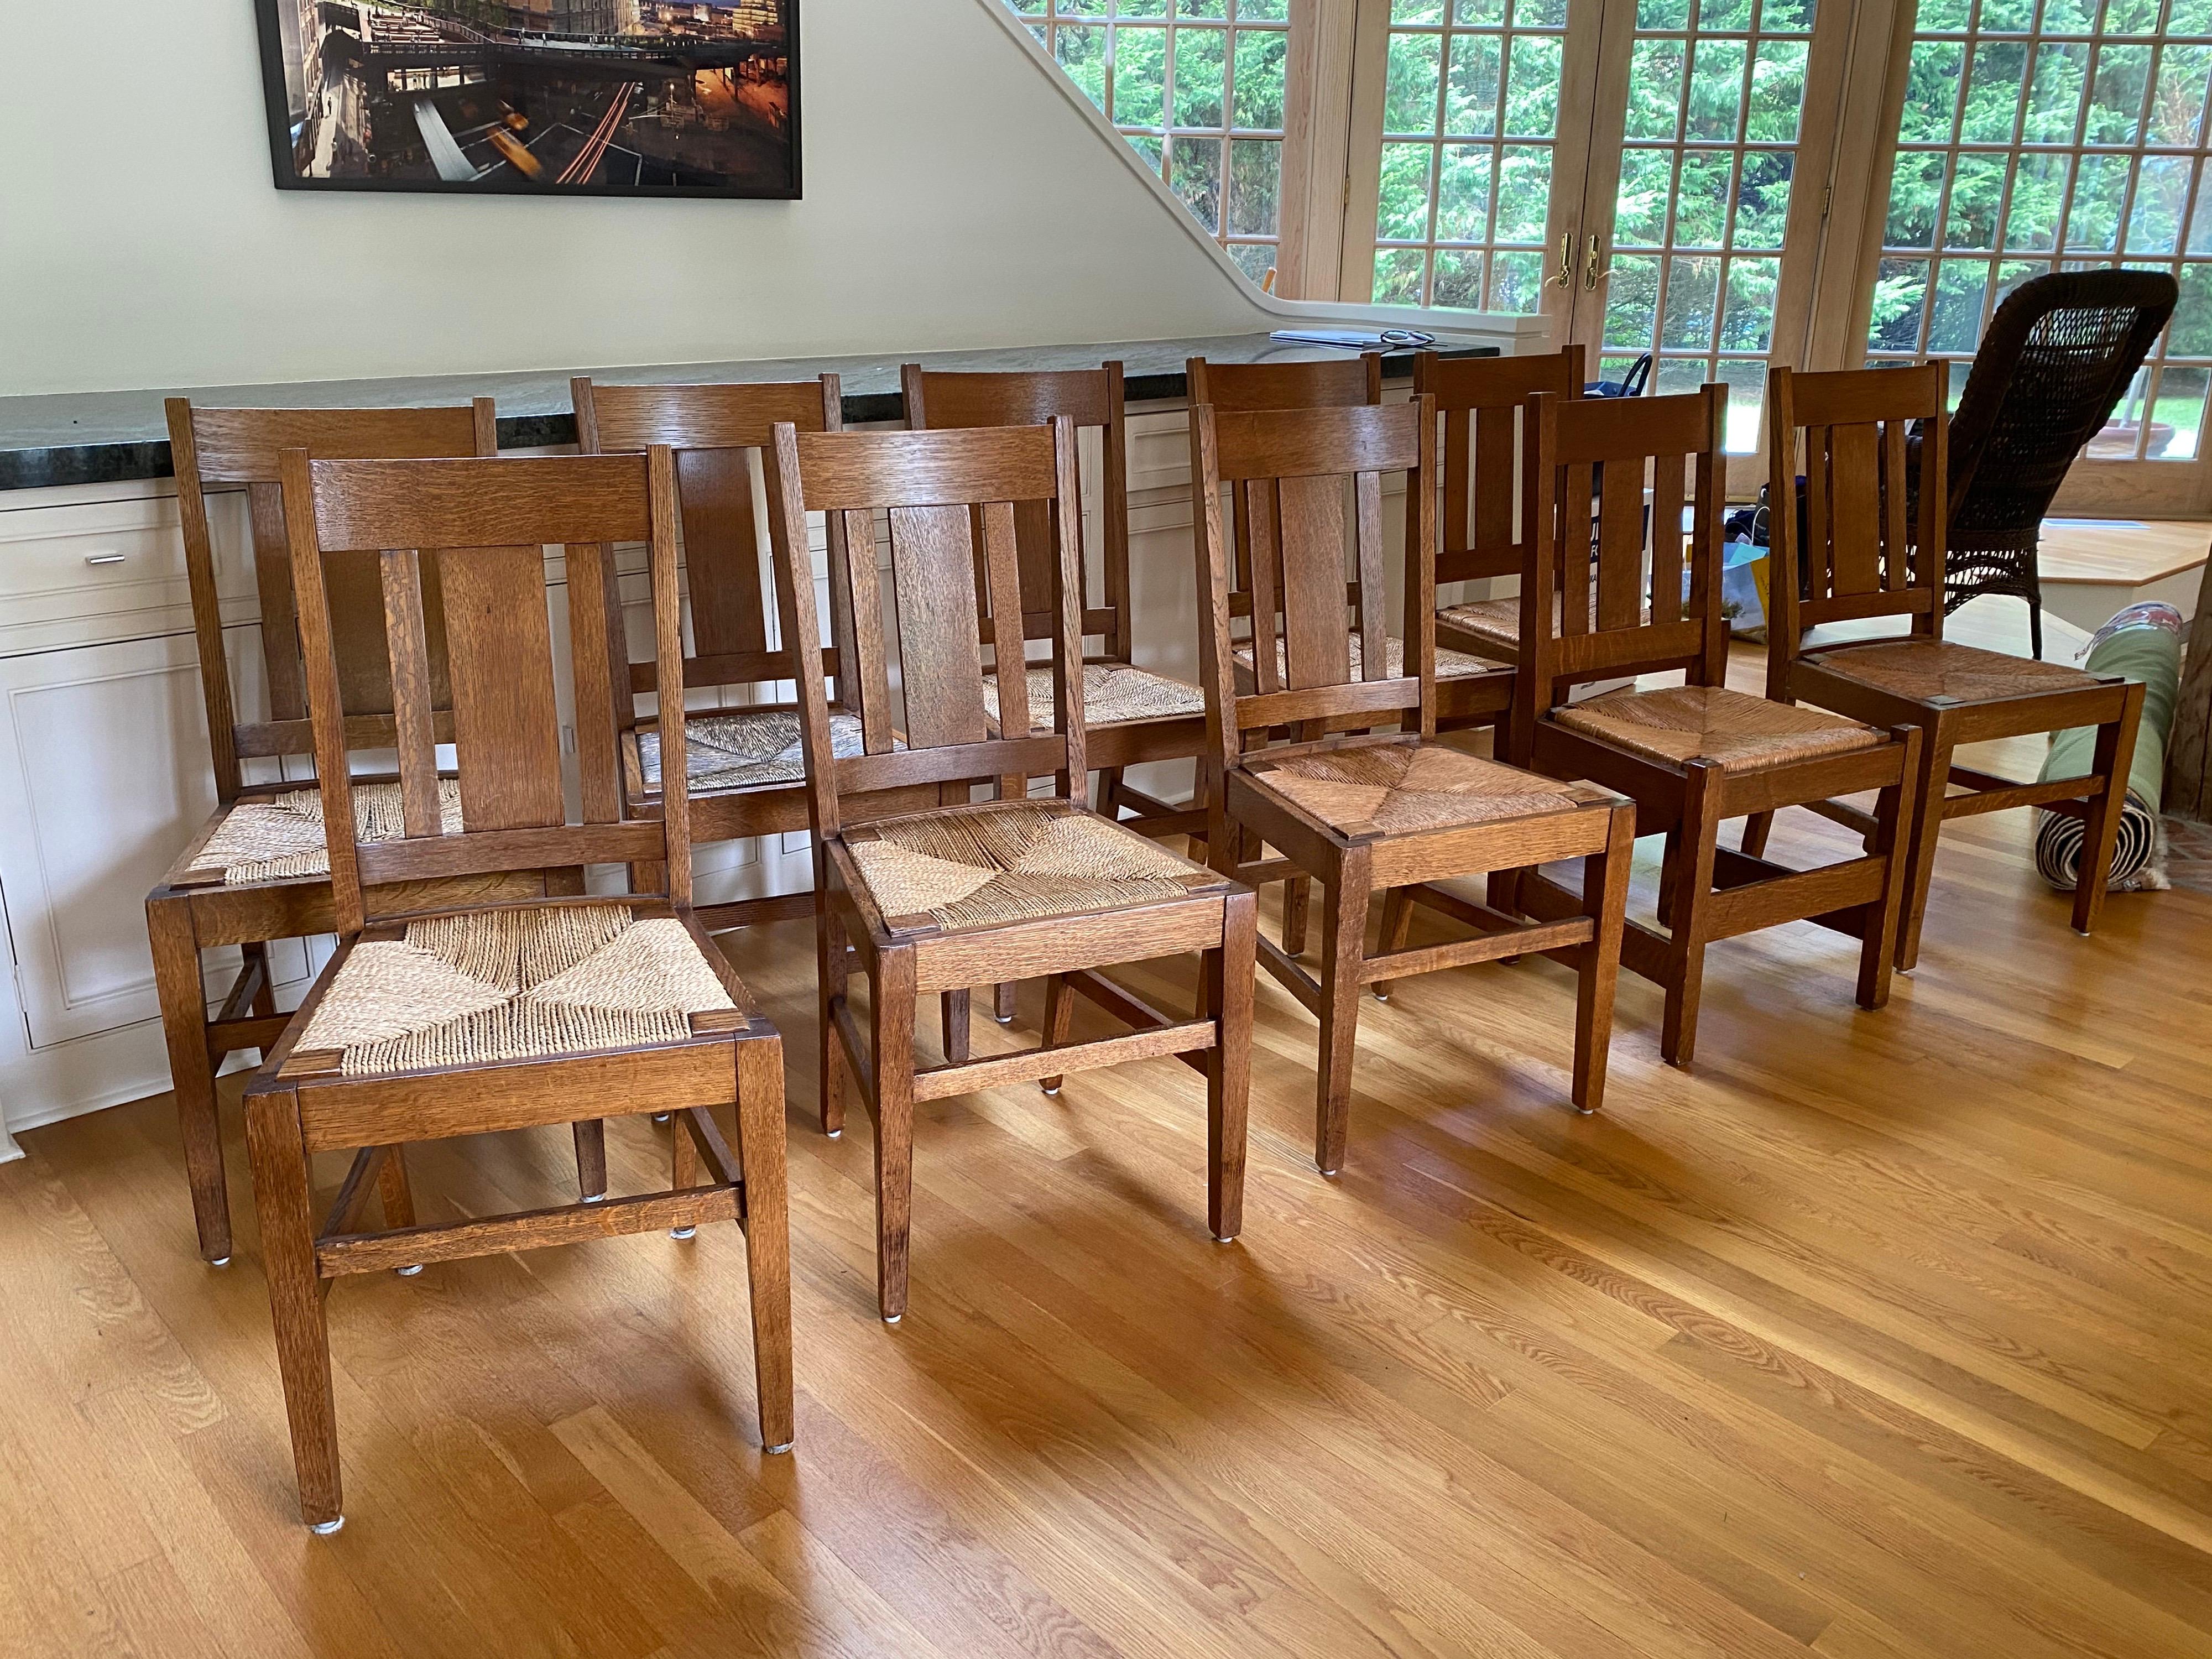 Set of ten Arts & Crafts Stickley-style oak dining chairs. A matched set of eight + two additional. All with rush seating. Two of the chairs look to be added to the set and go well but are not original. The front leg posts of the two chairs project